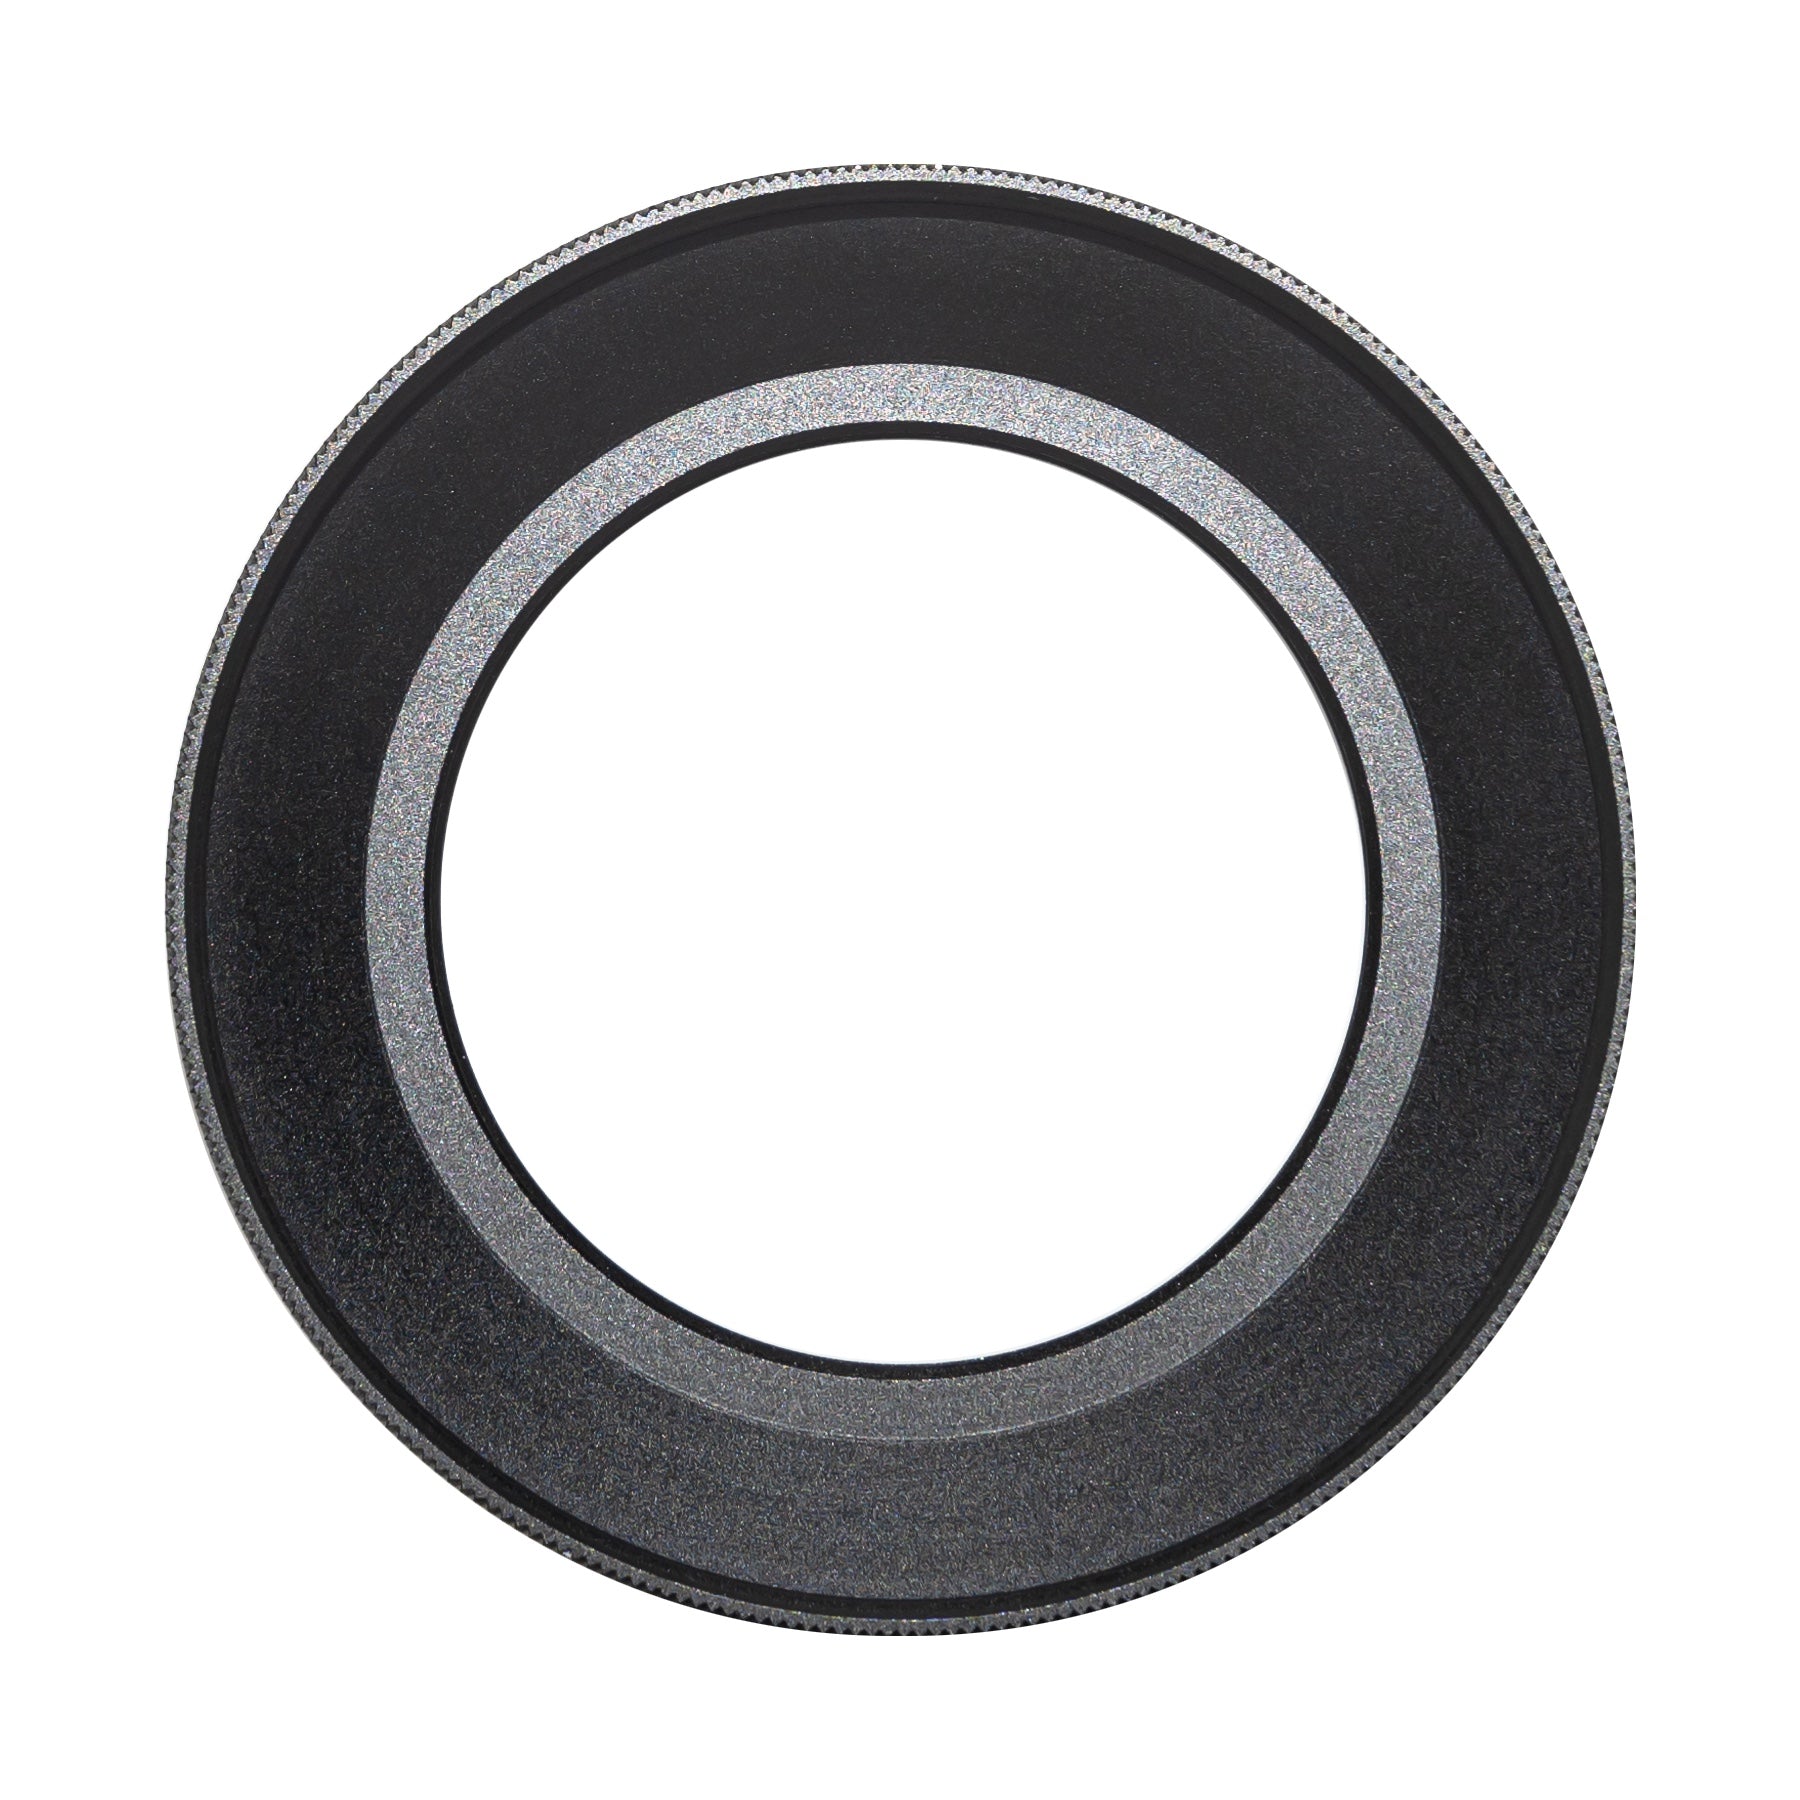 Step-Up Adapter Ring 62mm (for Pro Series Lenses) - REEFLEX